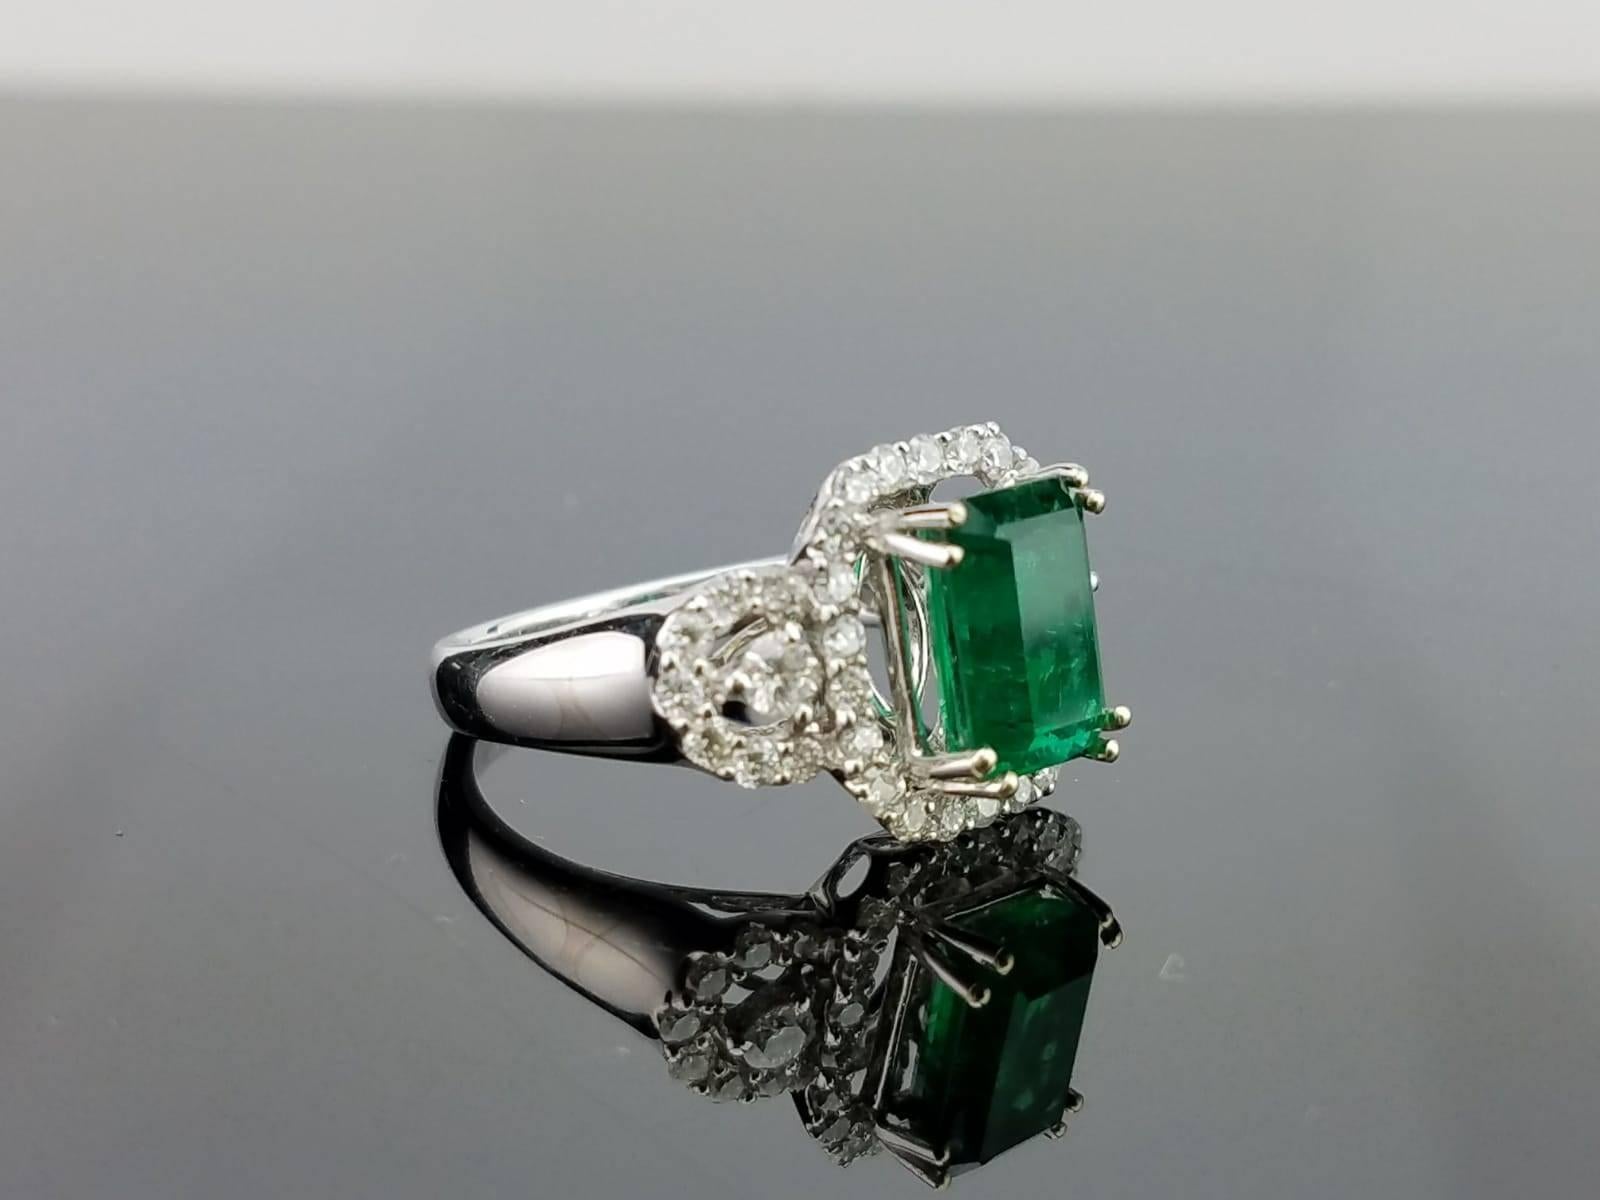 A classic and elegant looking ring, with a 2.36 carat high quality and clarity Zambian Emerald centre stone and diamonds all set on 18K gold diamond band. 

Stone Details: 
Stone: Emerald
Carat Weight: 2.36 Carats

Diamond Details: 
Total Carat